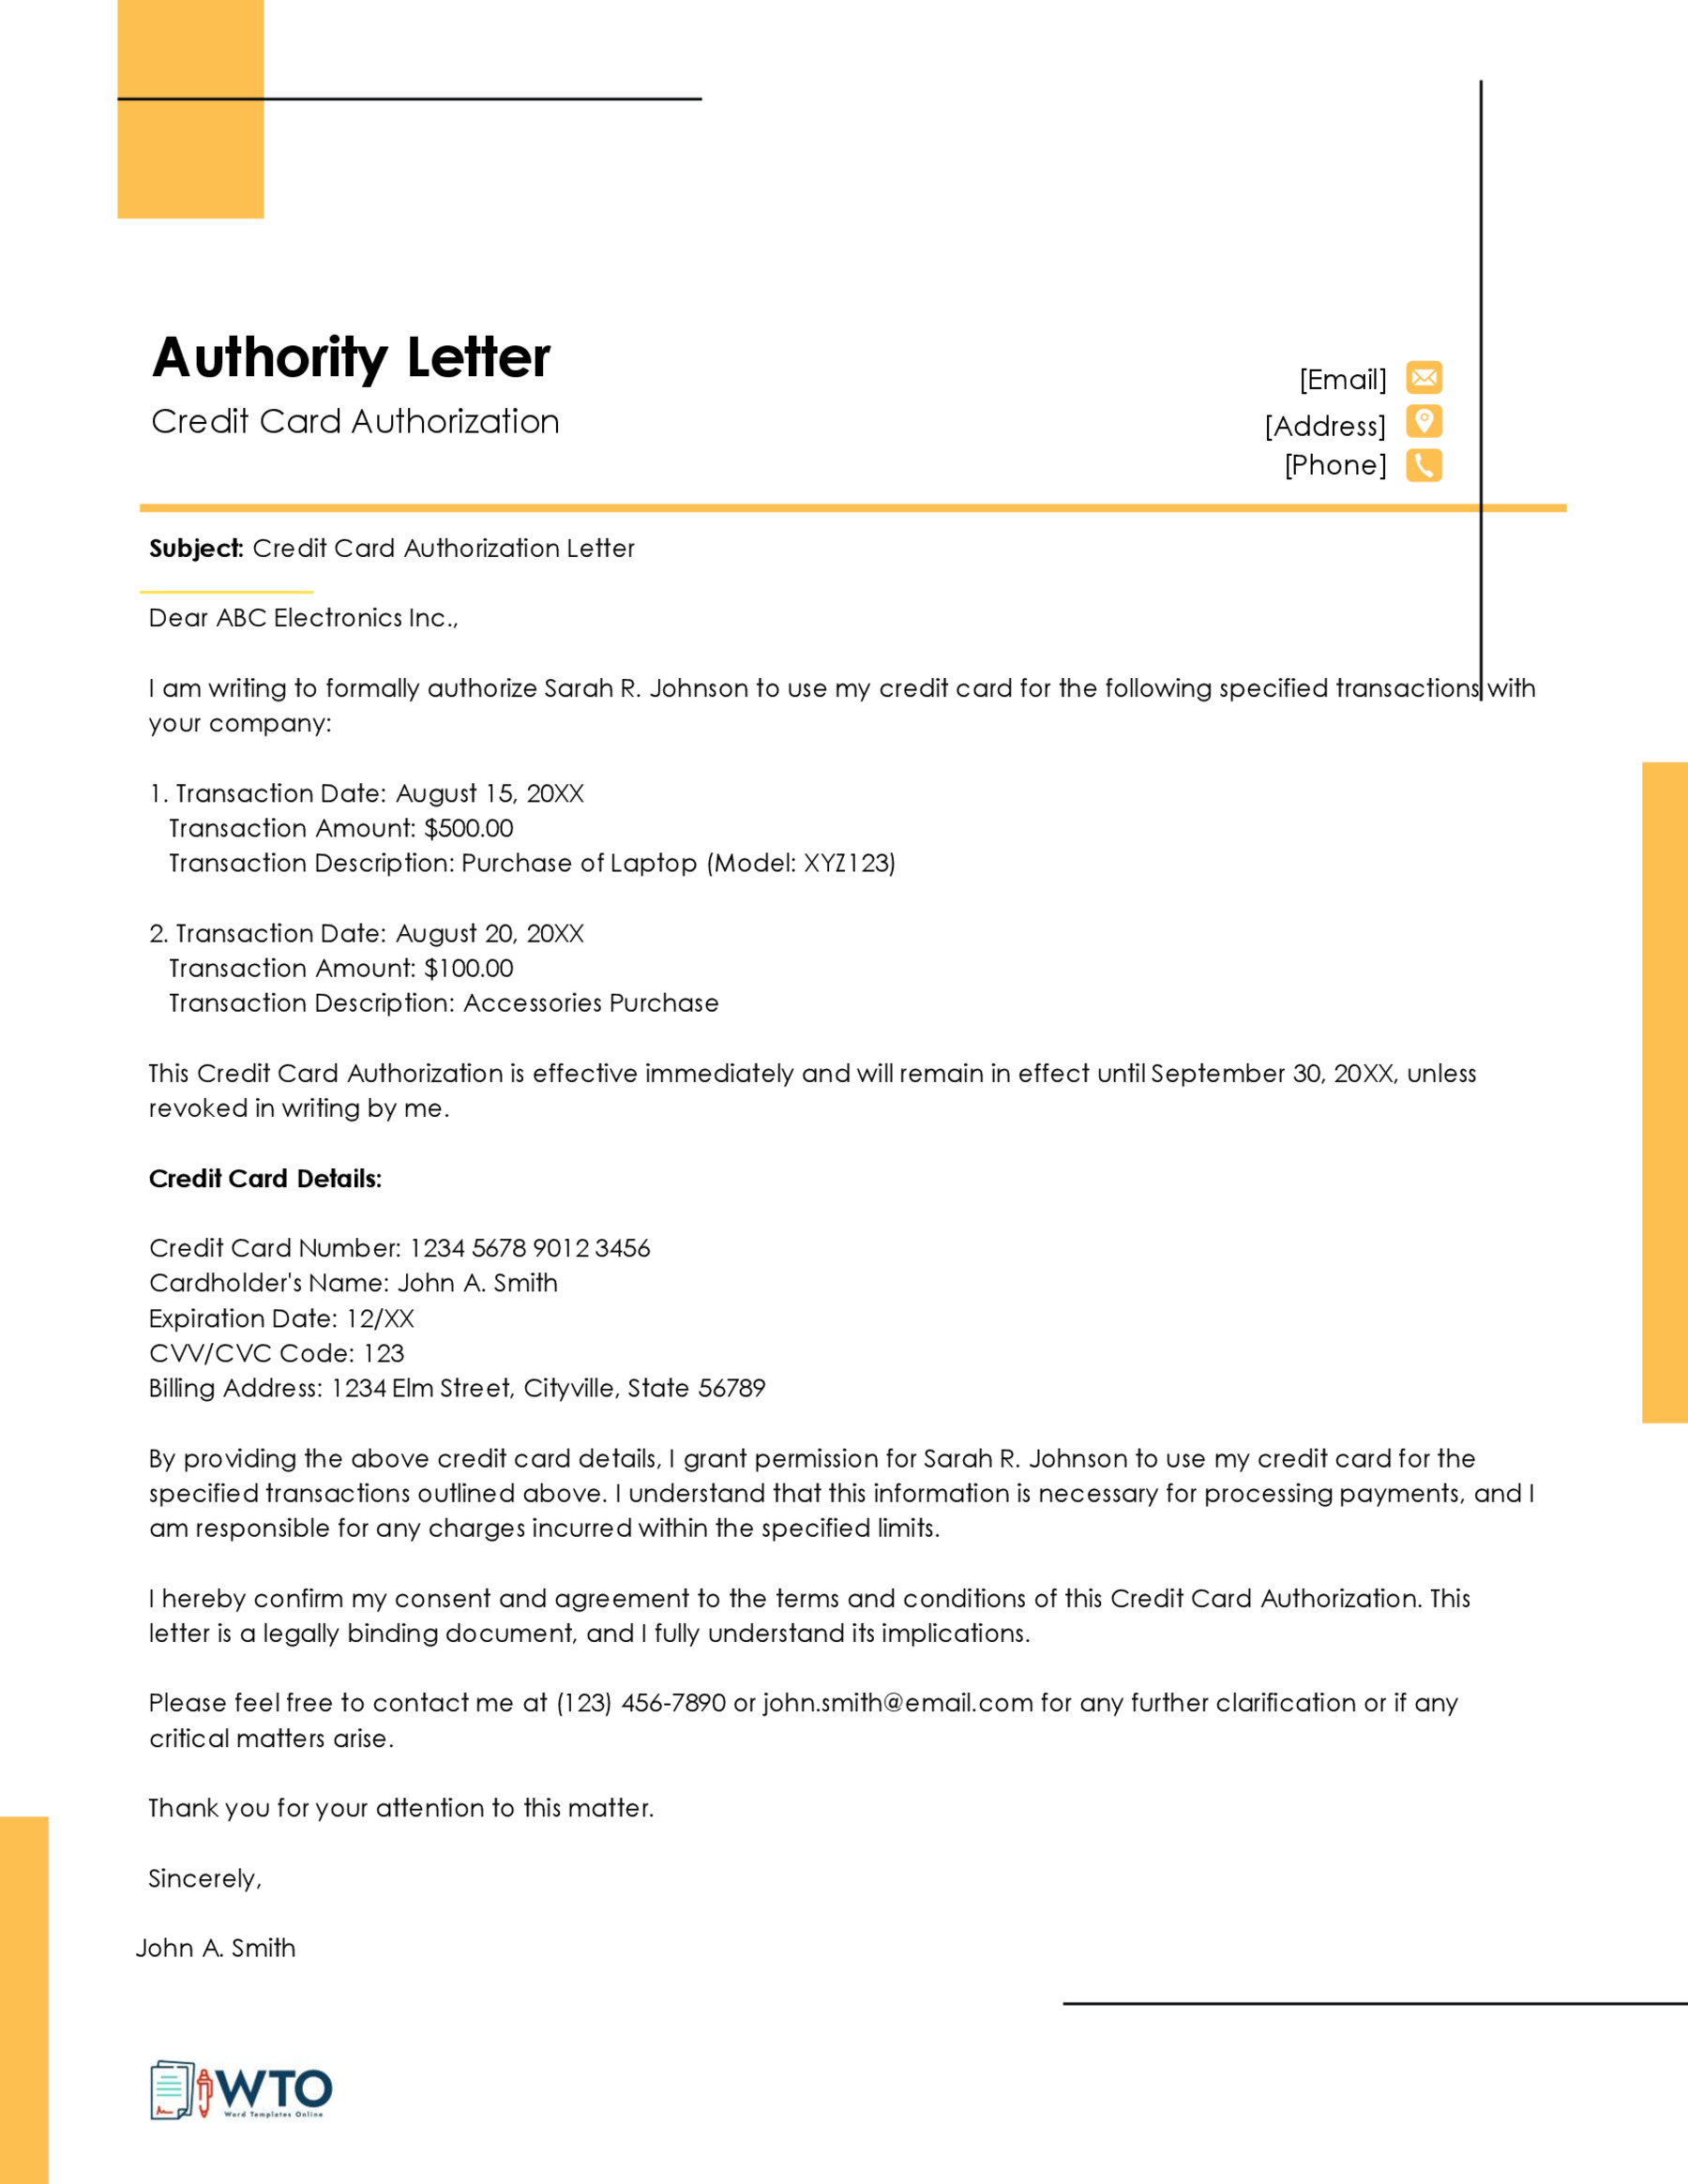 Credit Card Authorization Letter sample-MS Word Free Downlod